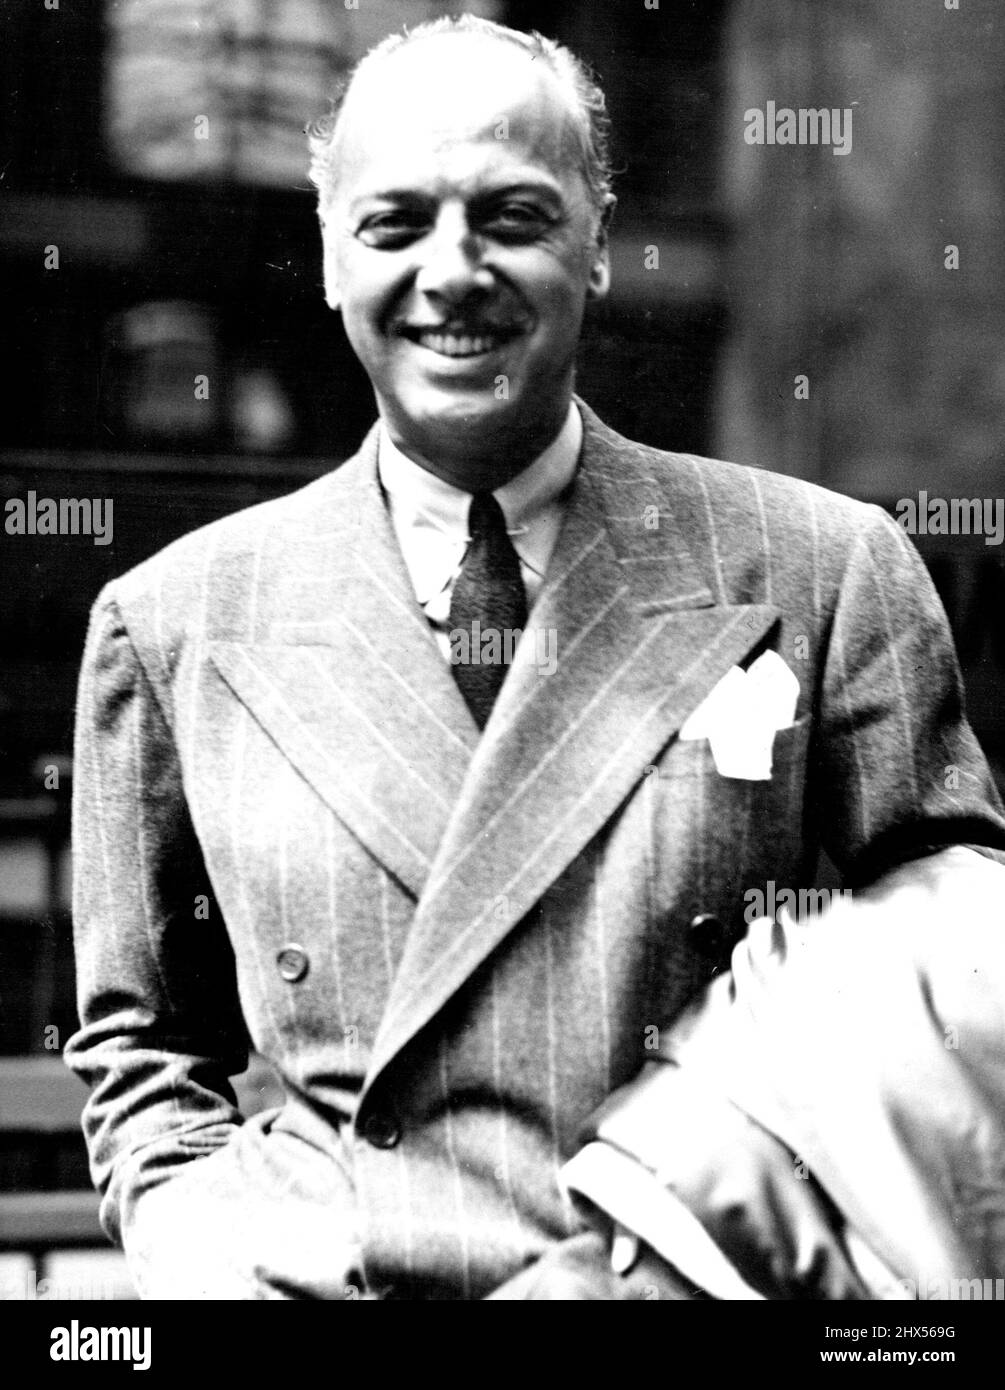 'Best Dressed' Film Director Arrives -- Mr. Mitcheel Leisen on arrival at Waterloo by the 'Normandie' boat train. Mr. Mitchell Leisen Hollywood's best dressed film director - who discovered Carole Lombard - arrived in London this afternoon. He is making London scenes for the new film 'Big Broadcast of 1938'. August 02, 1937. Stock Photo